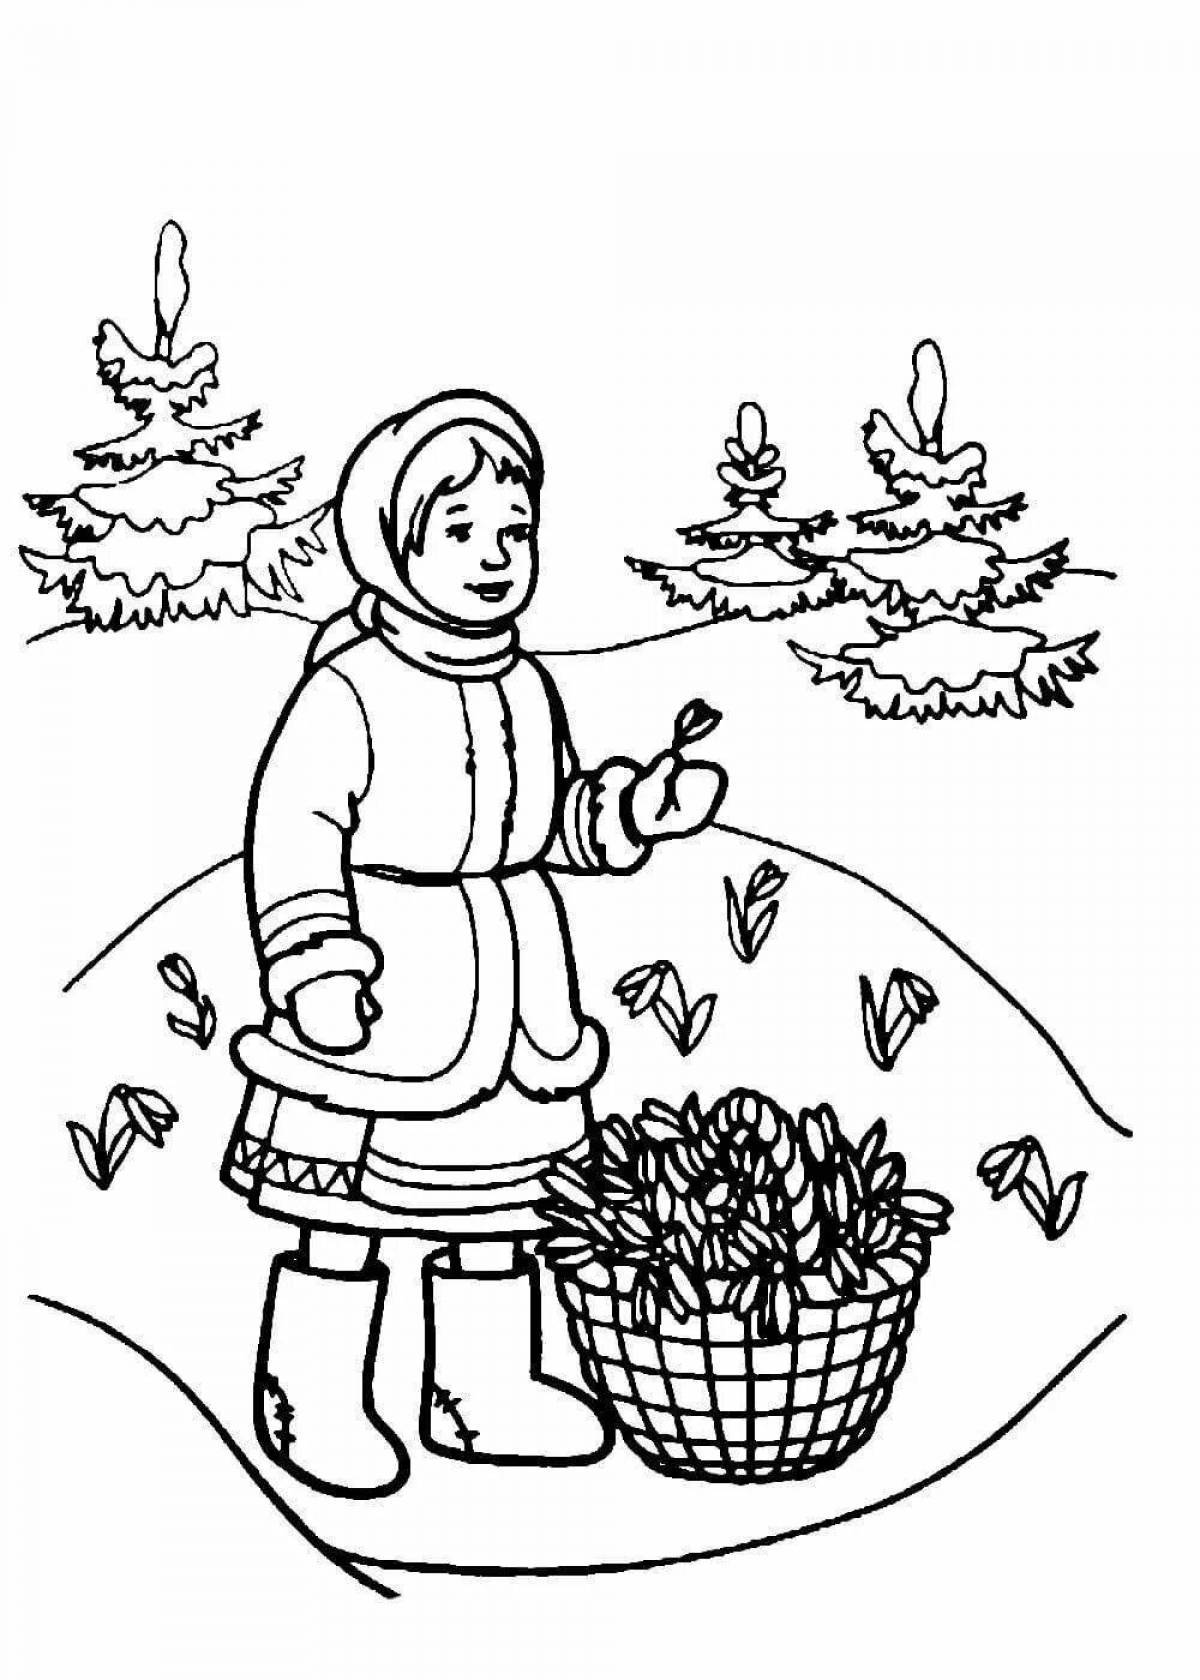 Amazing 12 months coloring pages for kids